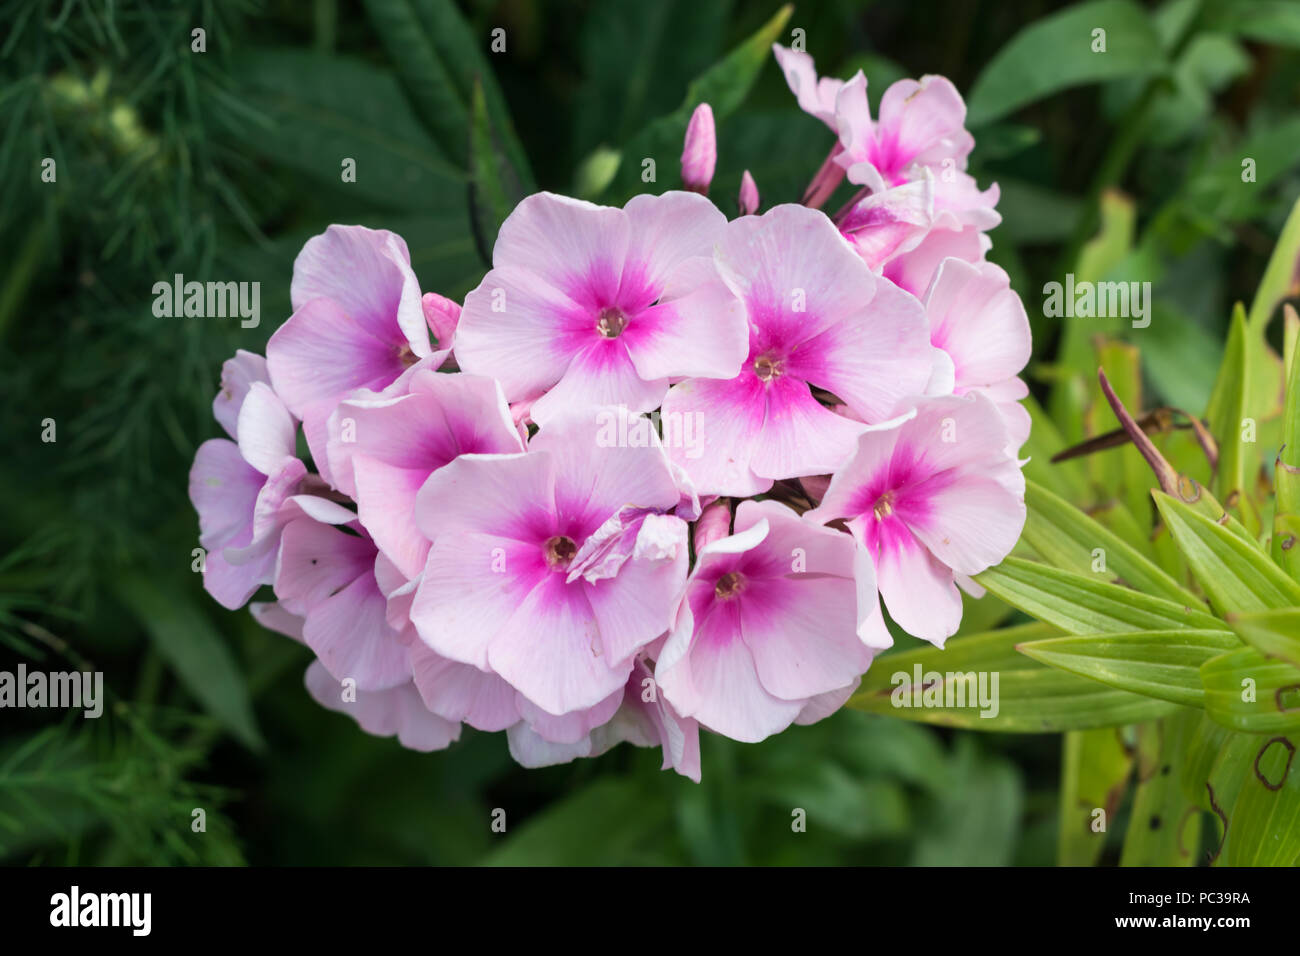 Phlox flower in the garden in Poland on the summer. Stock Photo